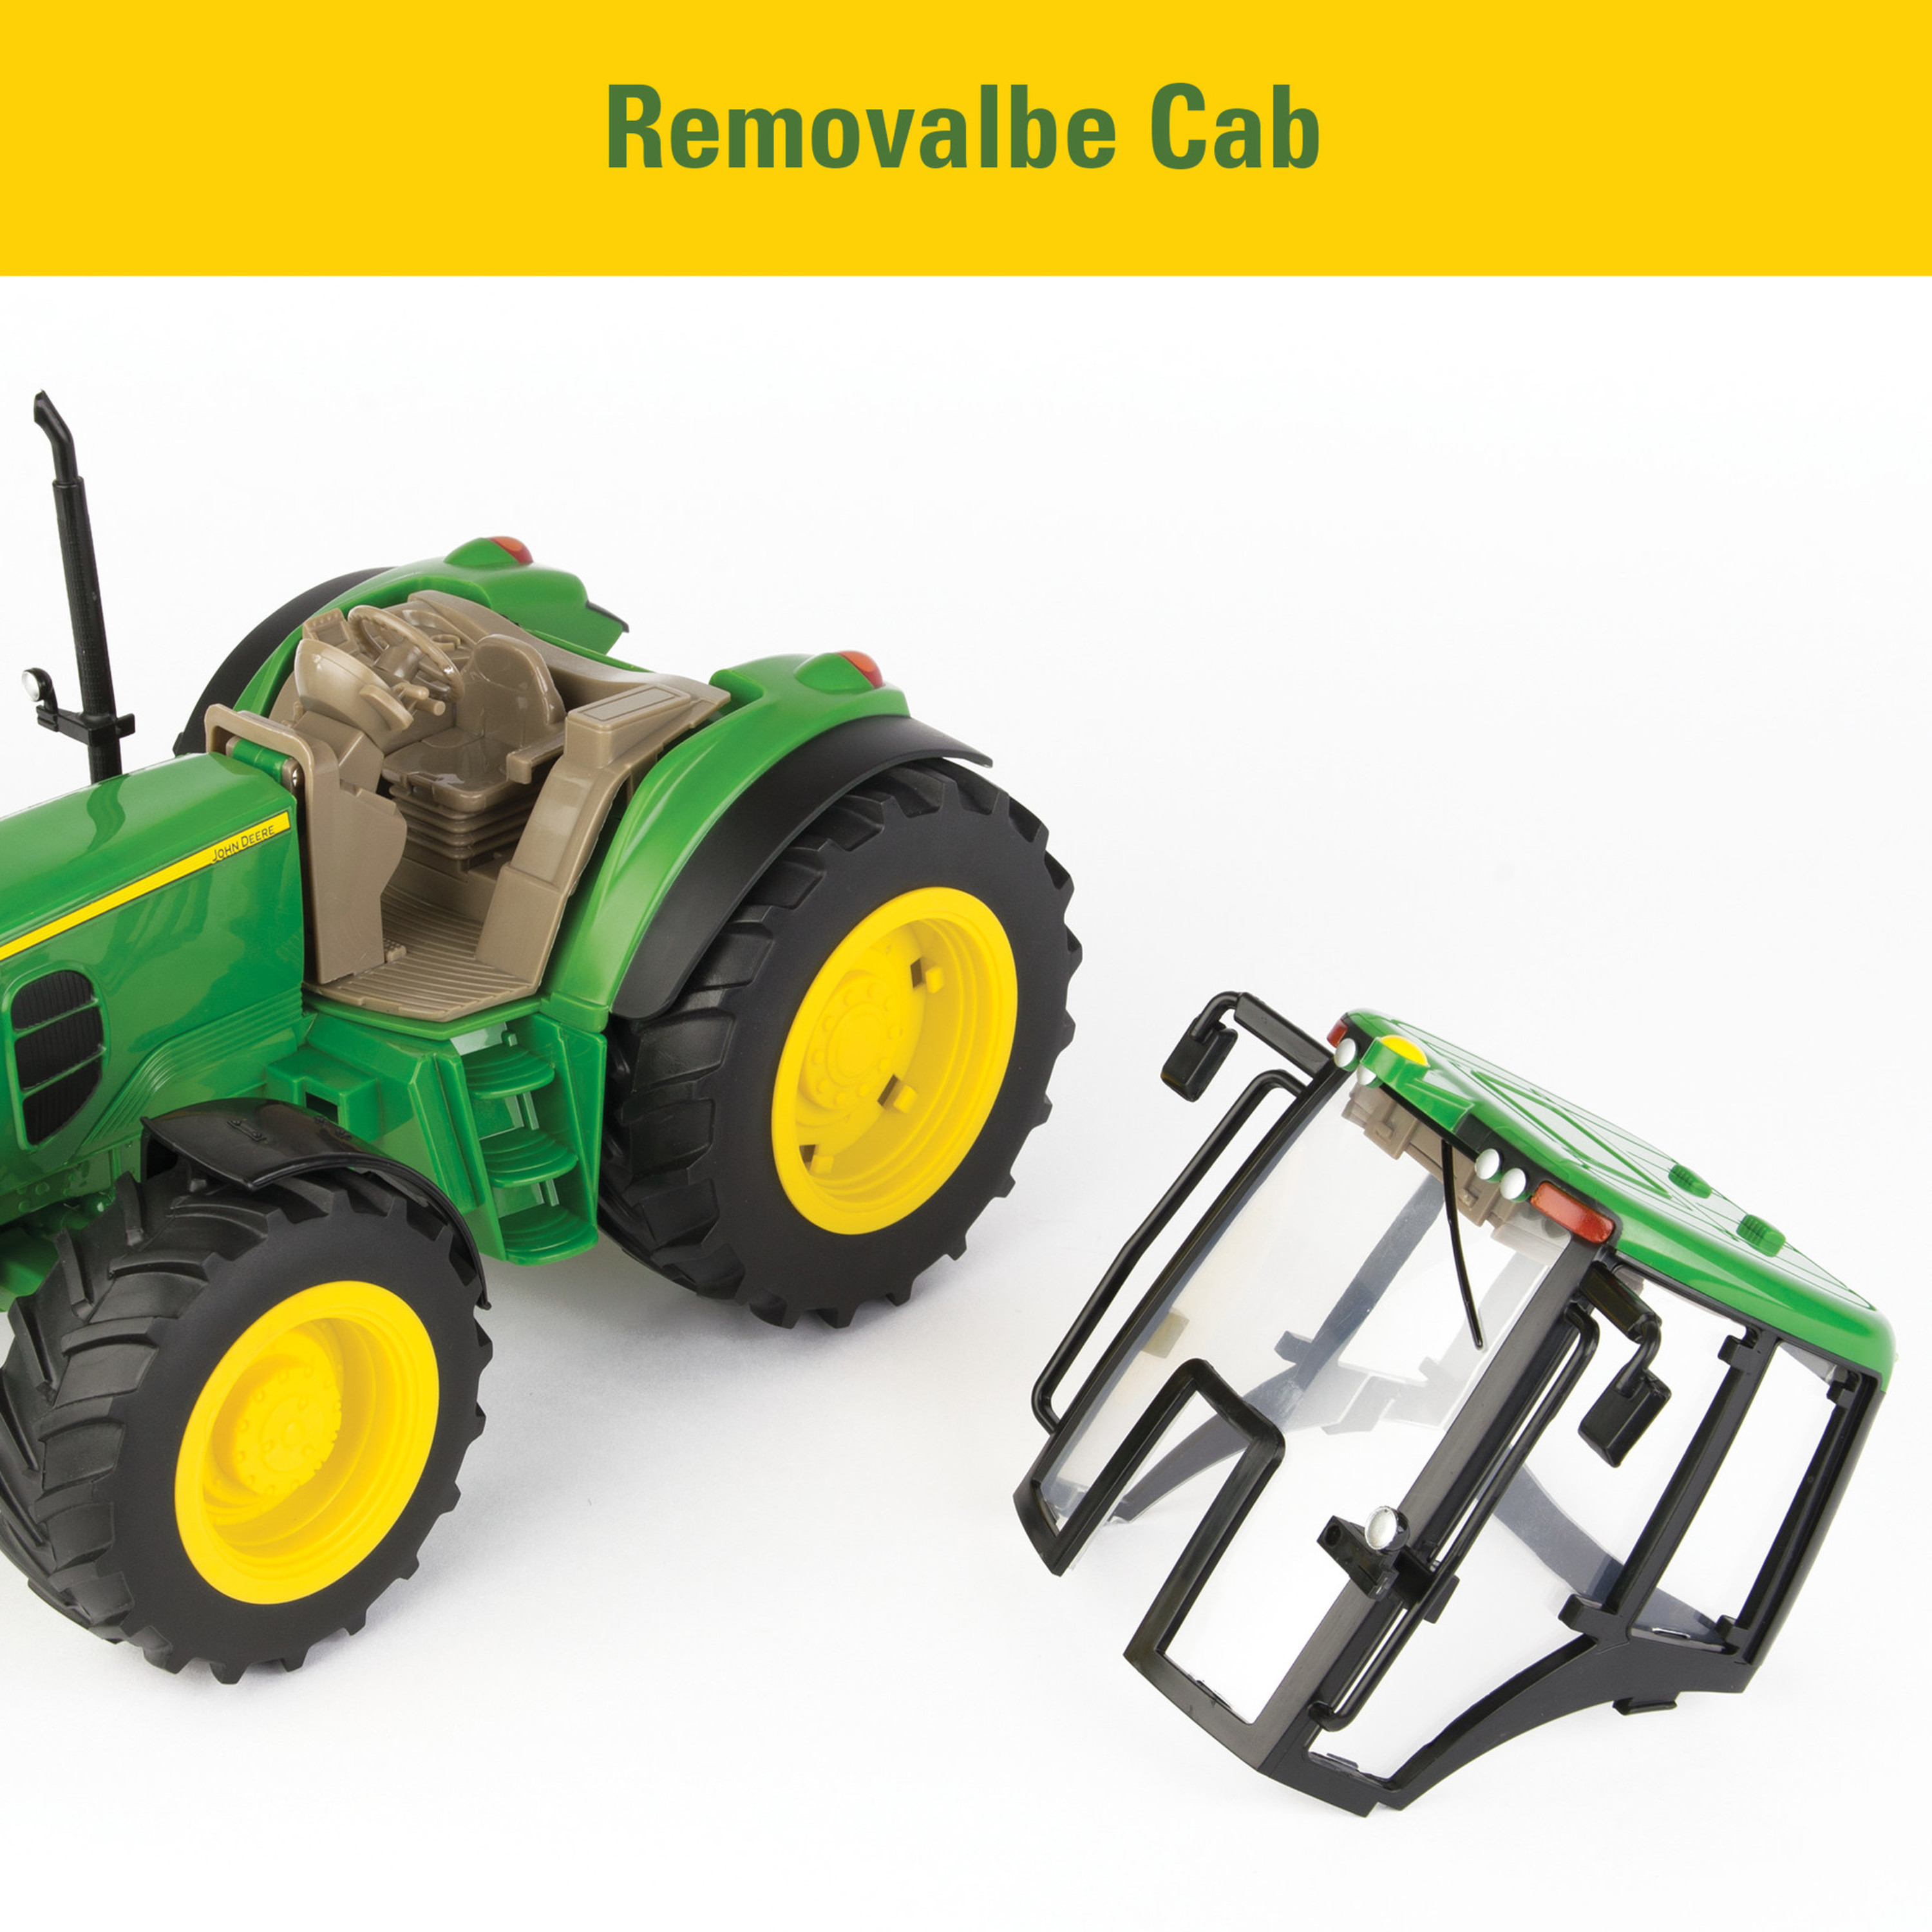 John Deere Big Farm Toy Tractor, 7430 Tractor with Wagon, 1:16 Scale - image 2 of 9